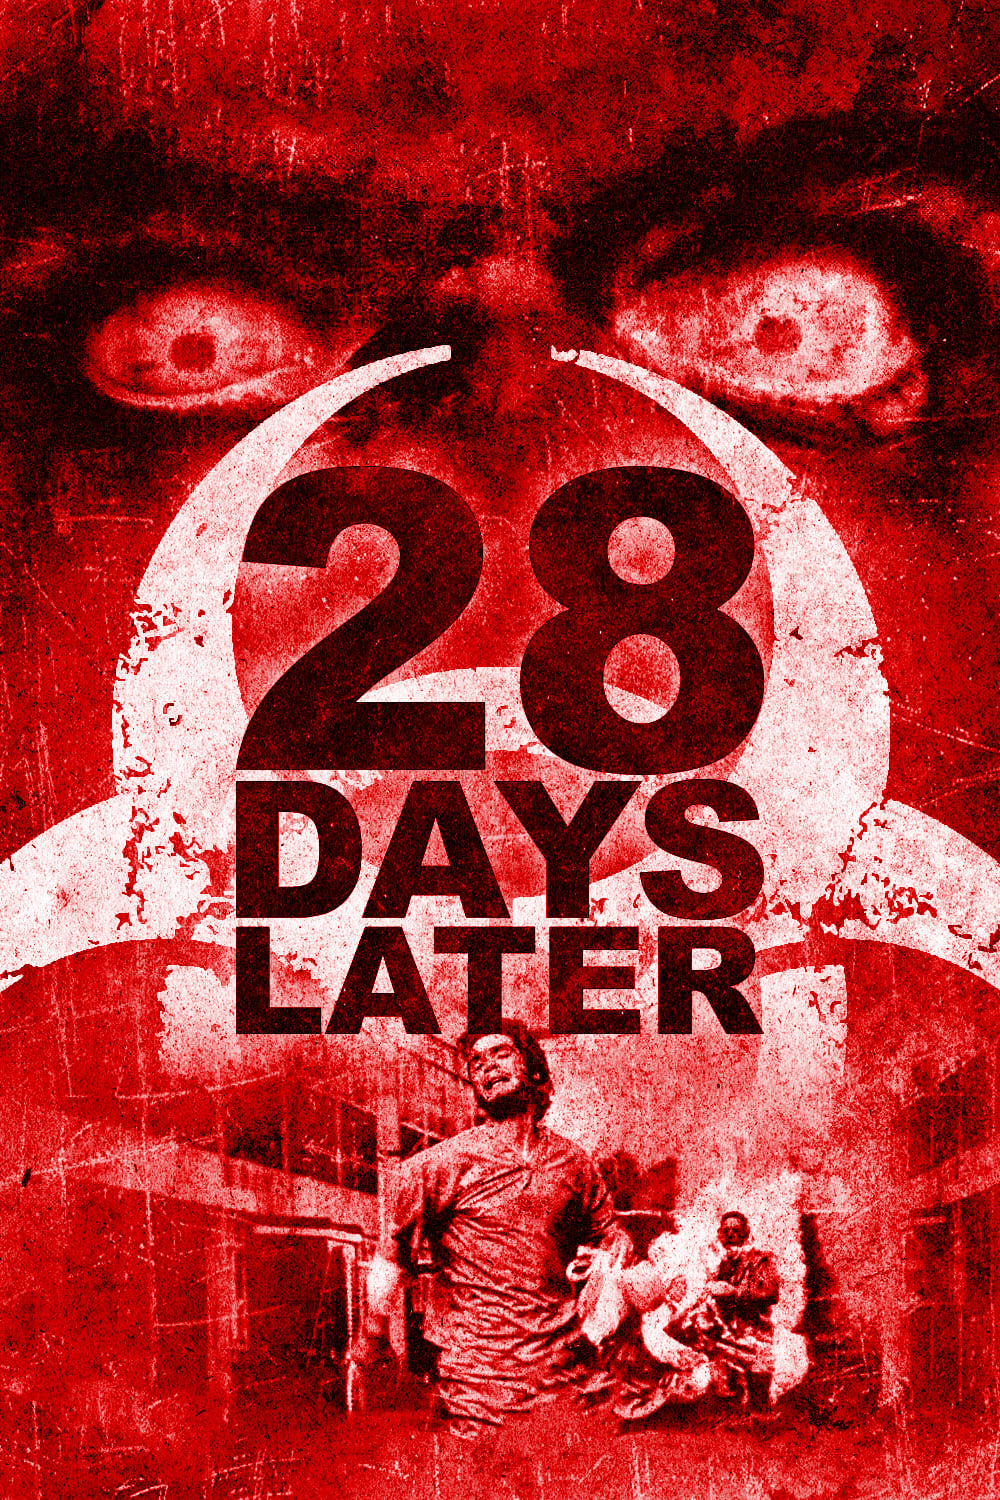 28 days later cast